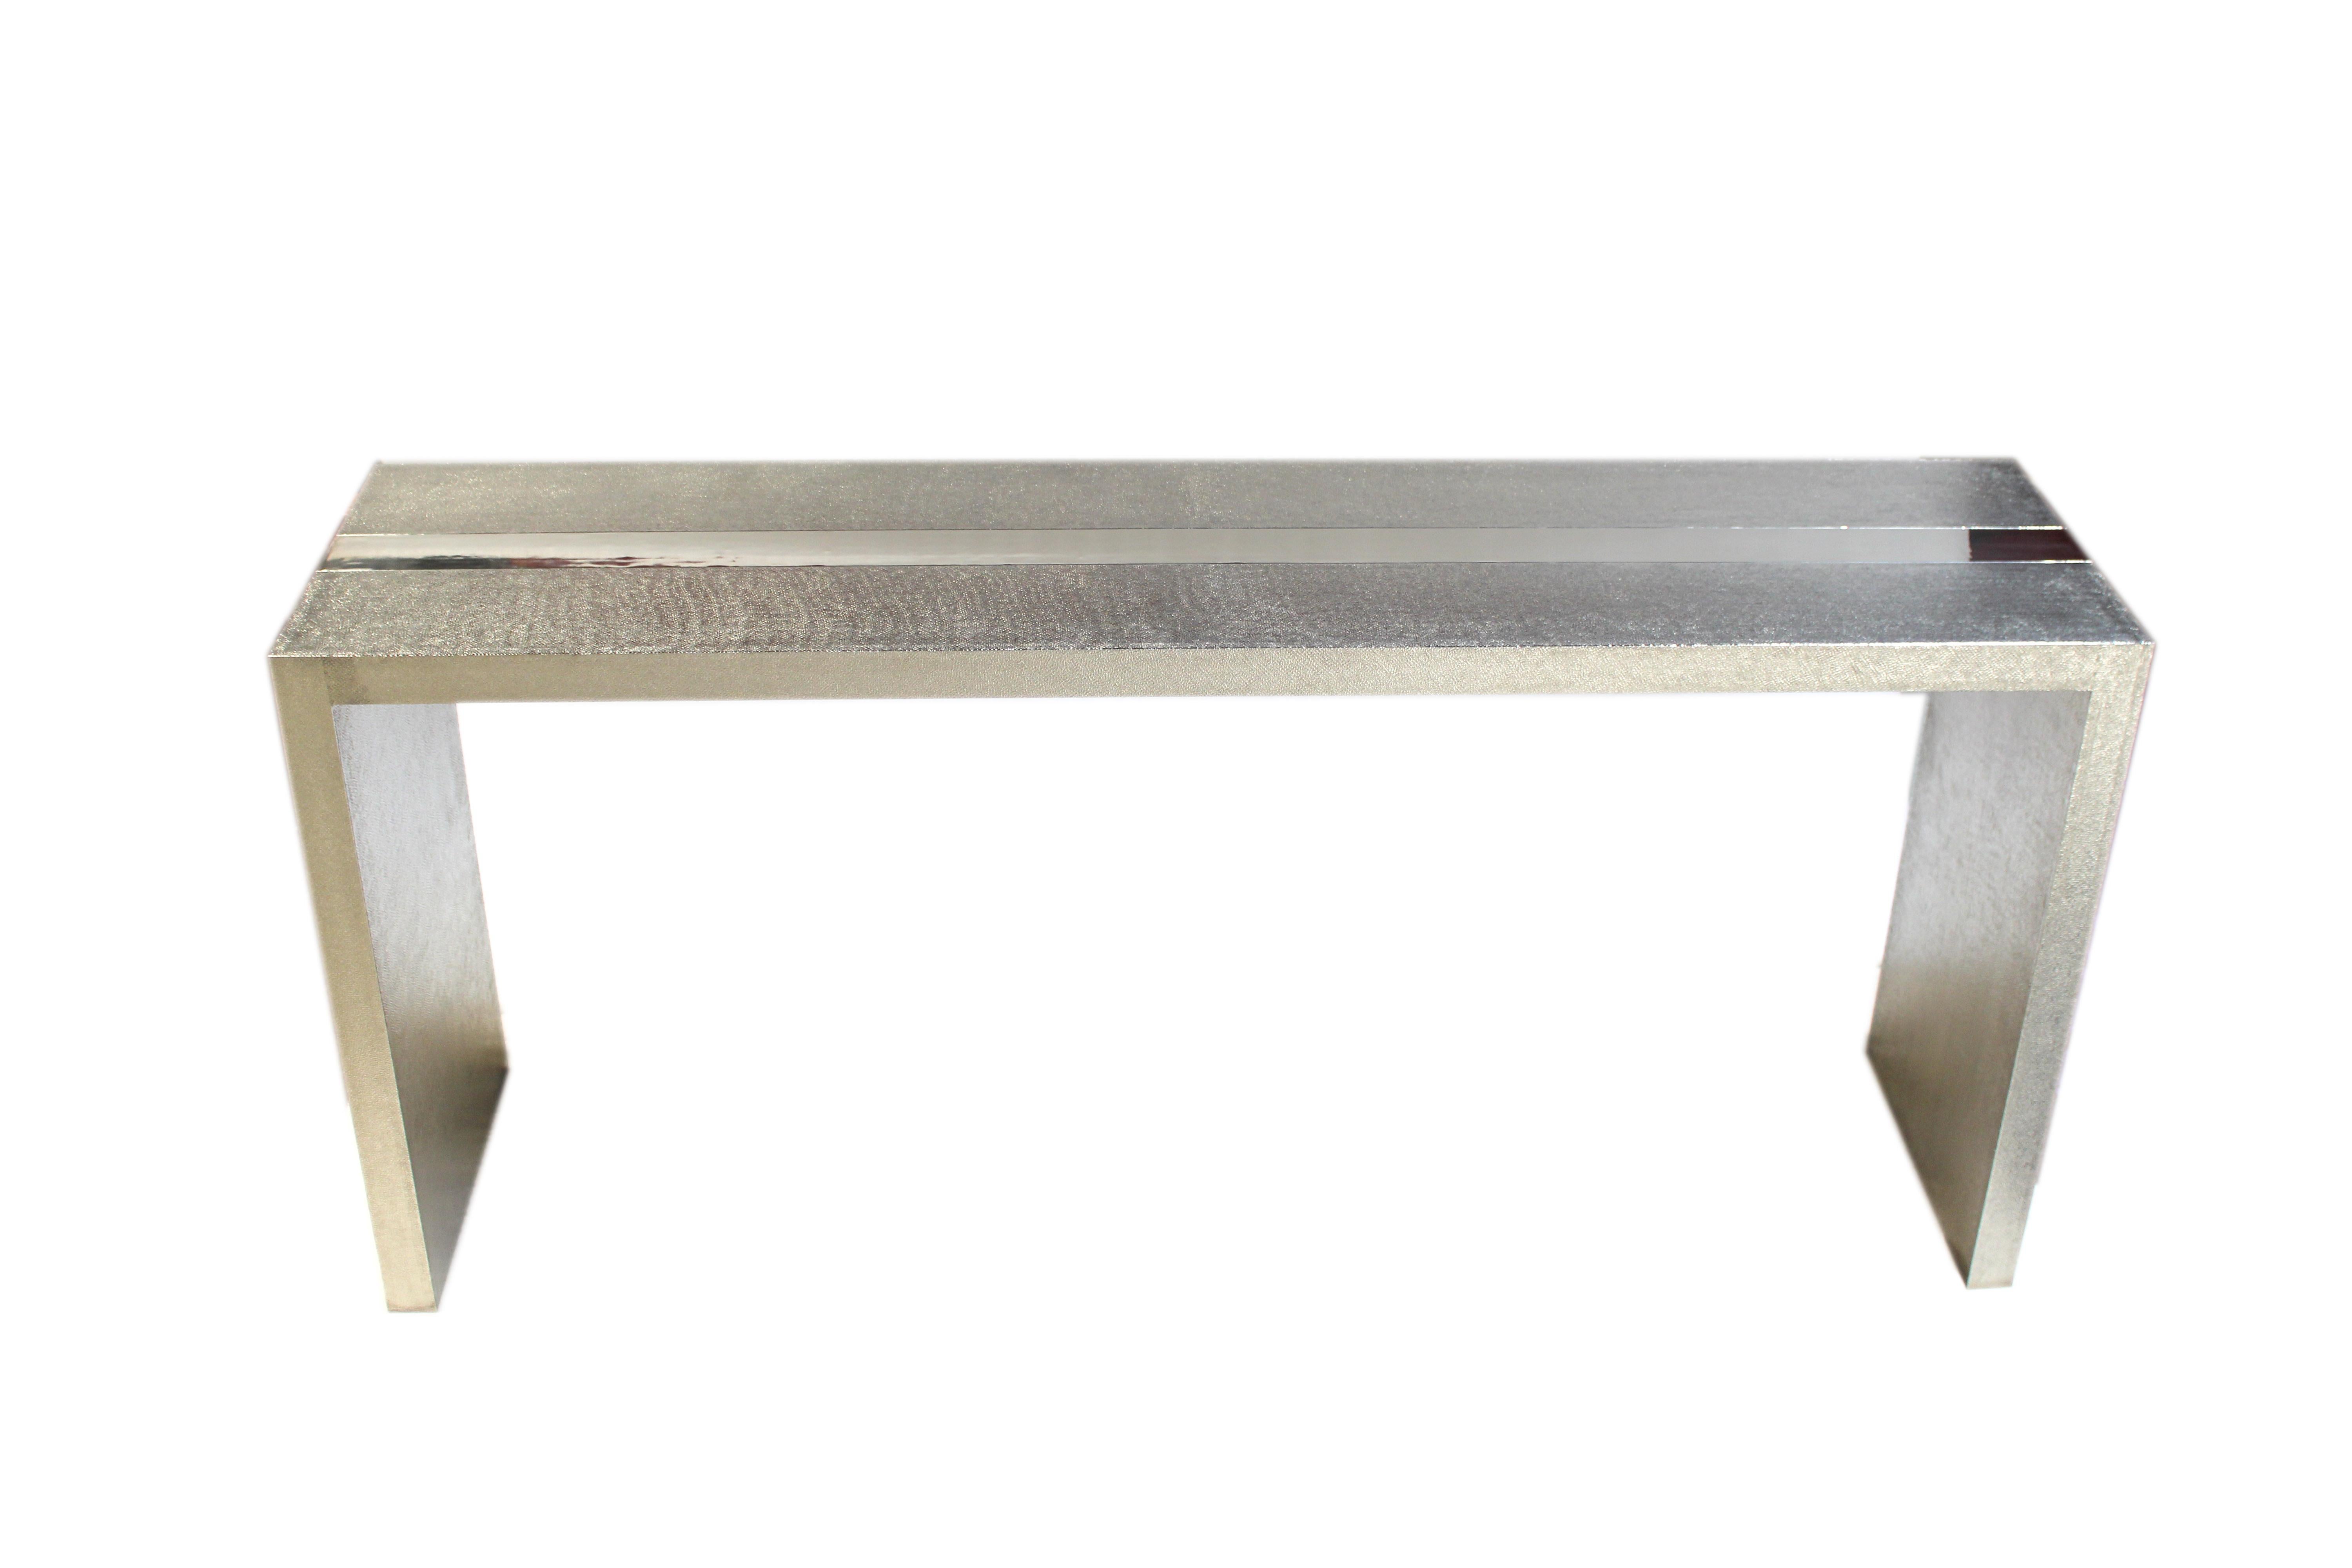 Art Nouveau Tray Tables Rectangular Console in Smooth Brass by Alison Spear For Sale 7